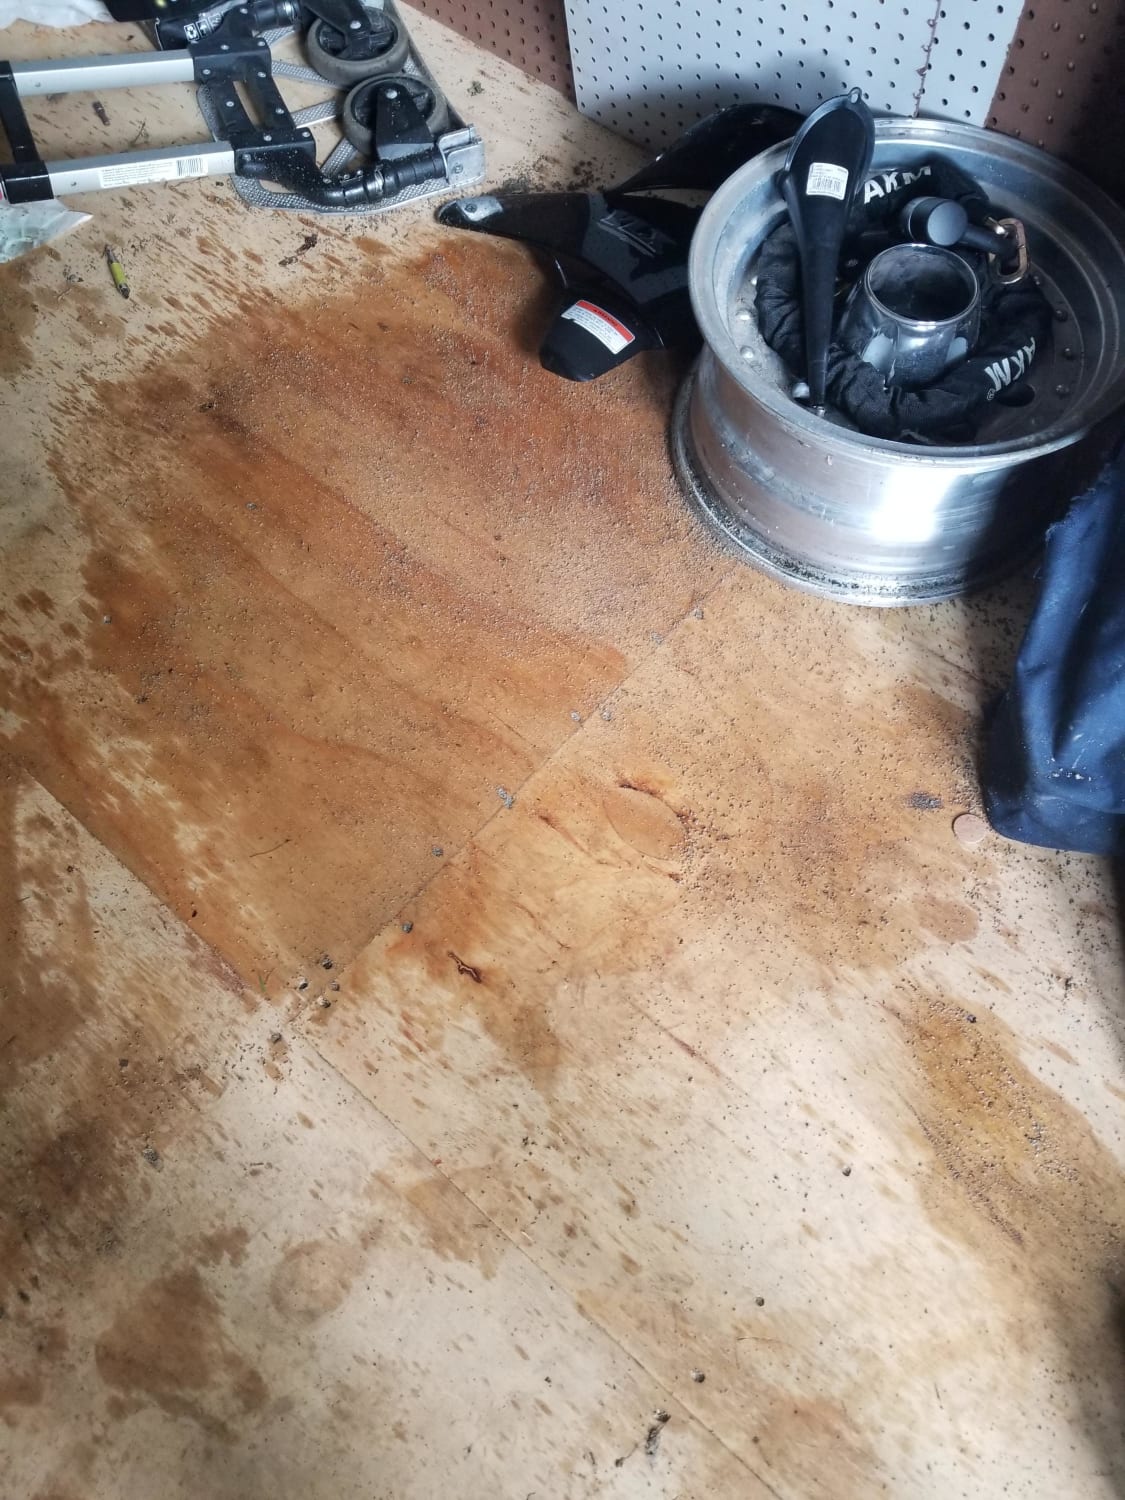 Dropped a qt of oil and it spilled all over my brand new wood floors of my shed. Used kitty litter to get the majority of it, any advice to clean up the rest?